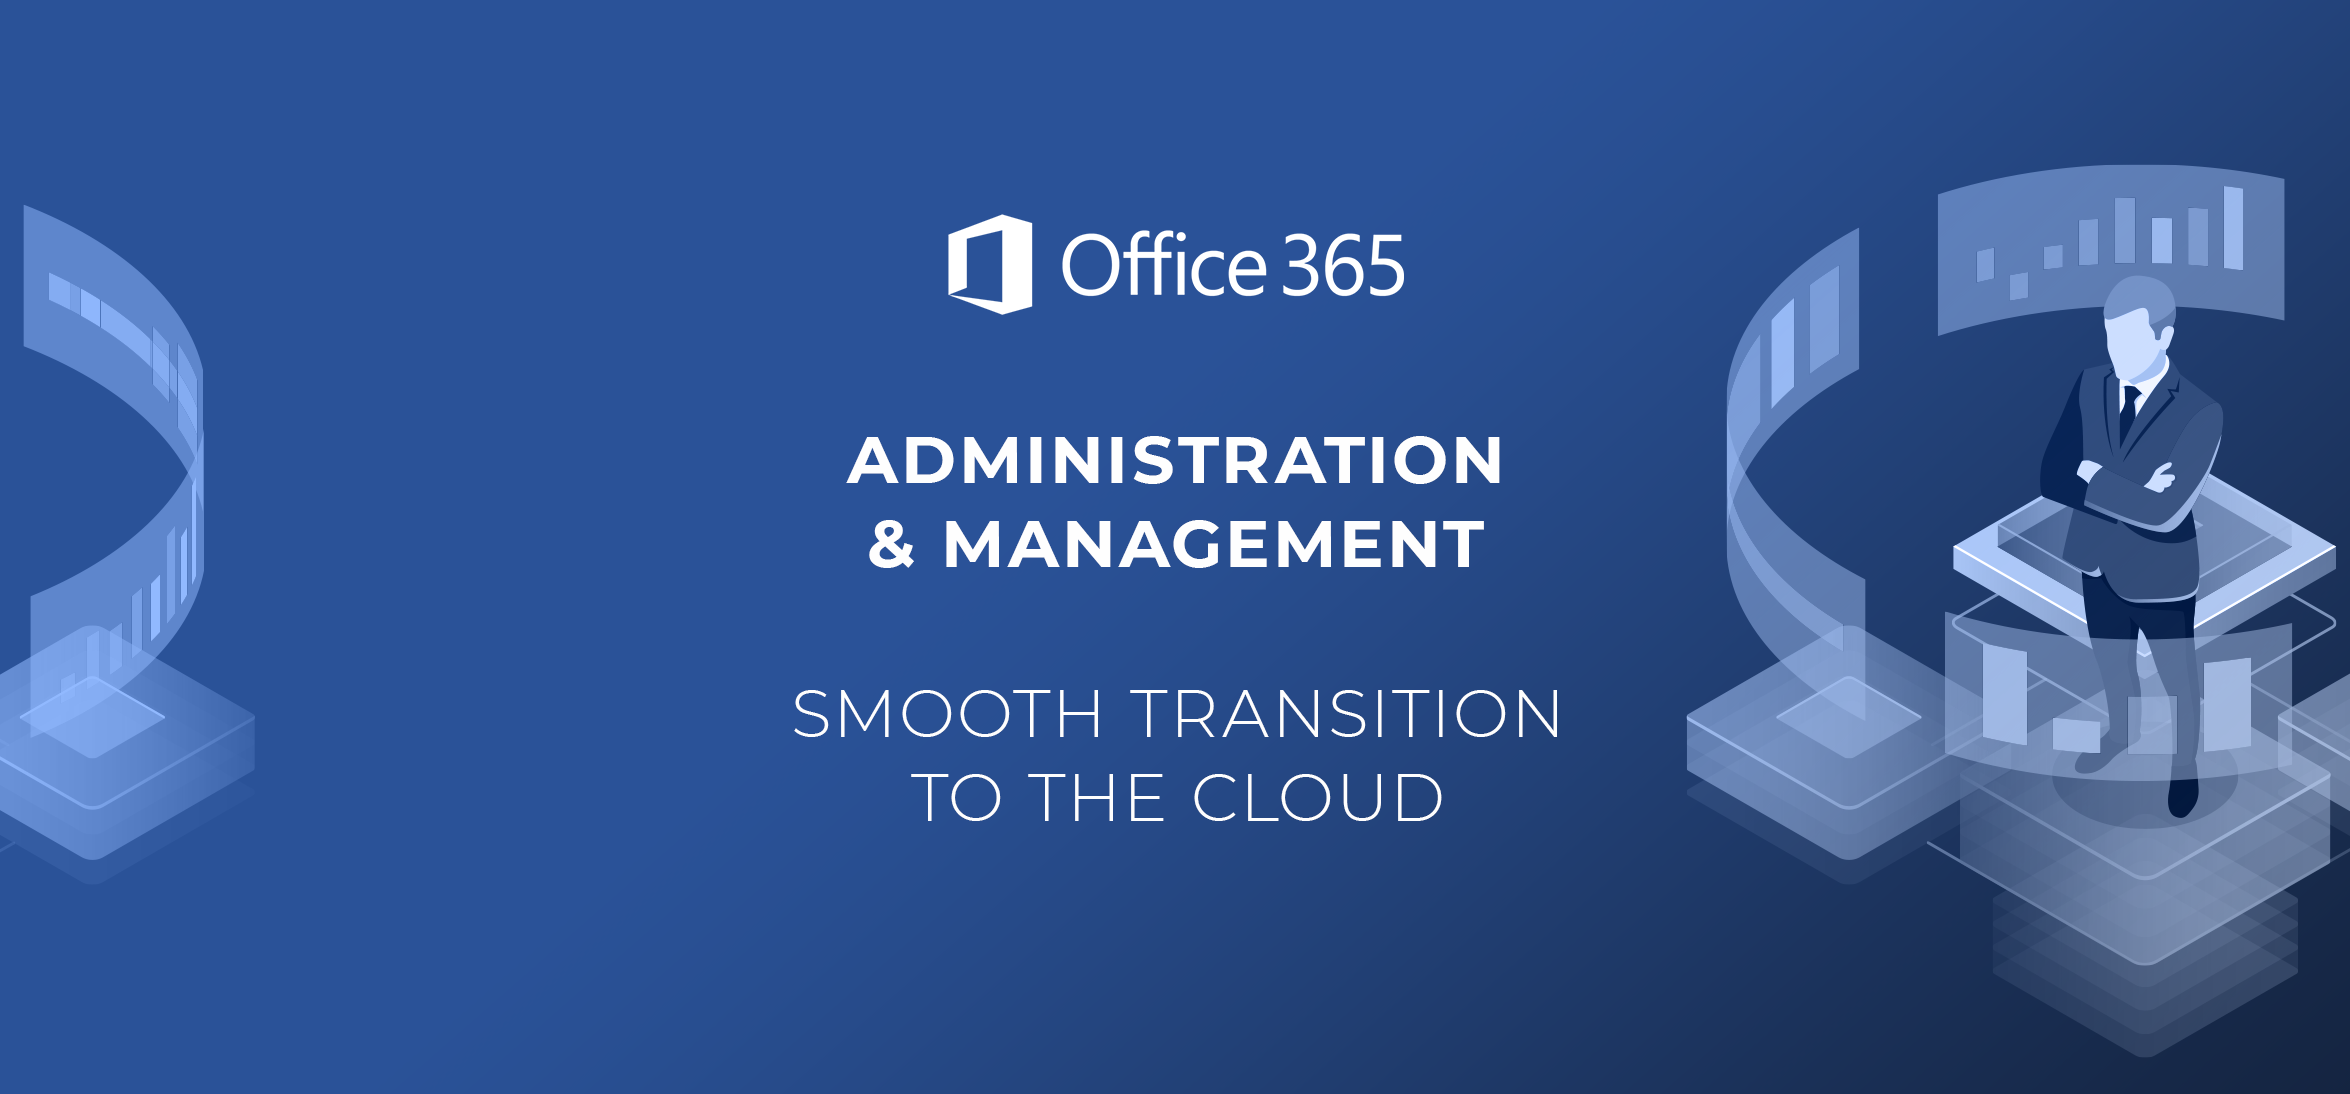 Microsoft Office 365 Administration Services in Lemon Grove CA, 91945